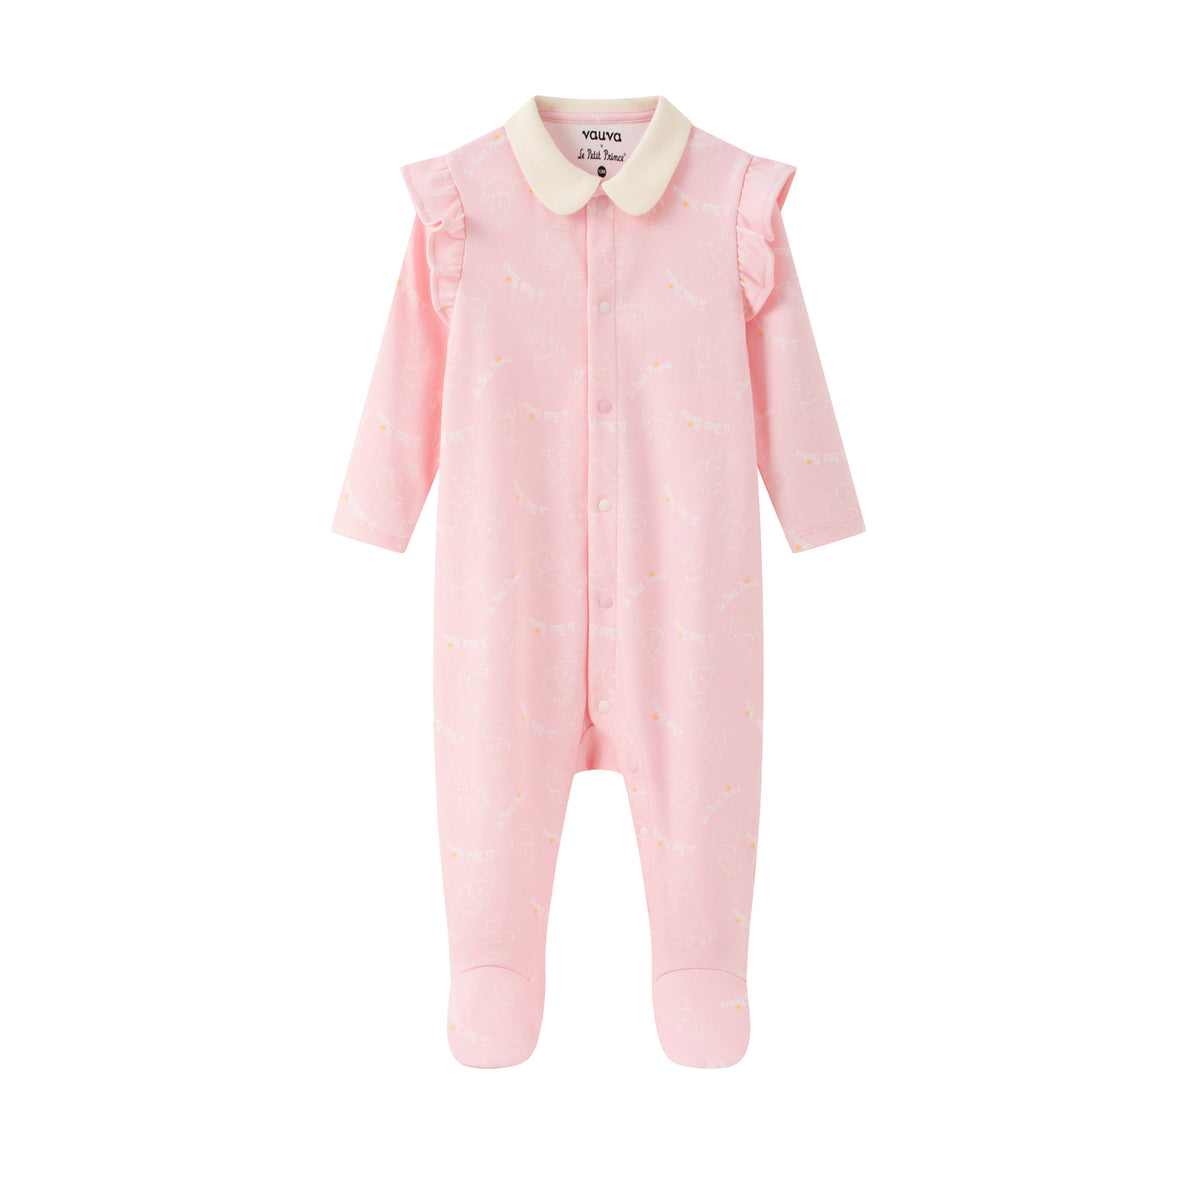 Vauva x Le Petit Prince - Baby Girl Romper Set product image front 